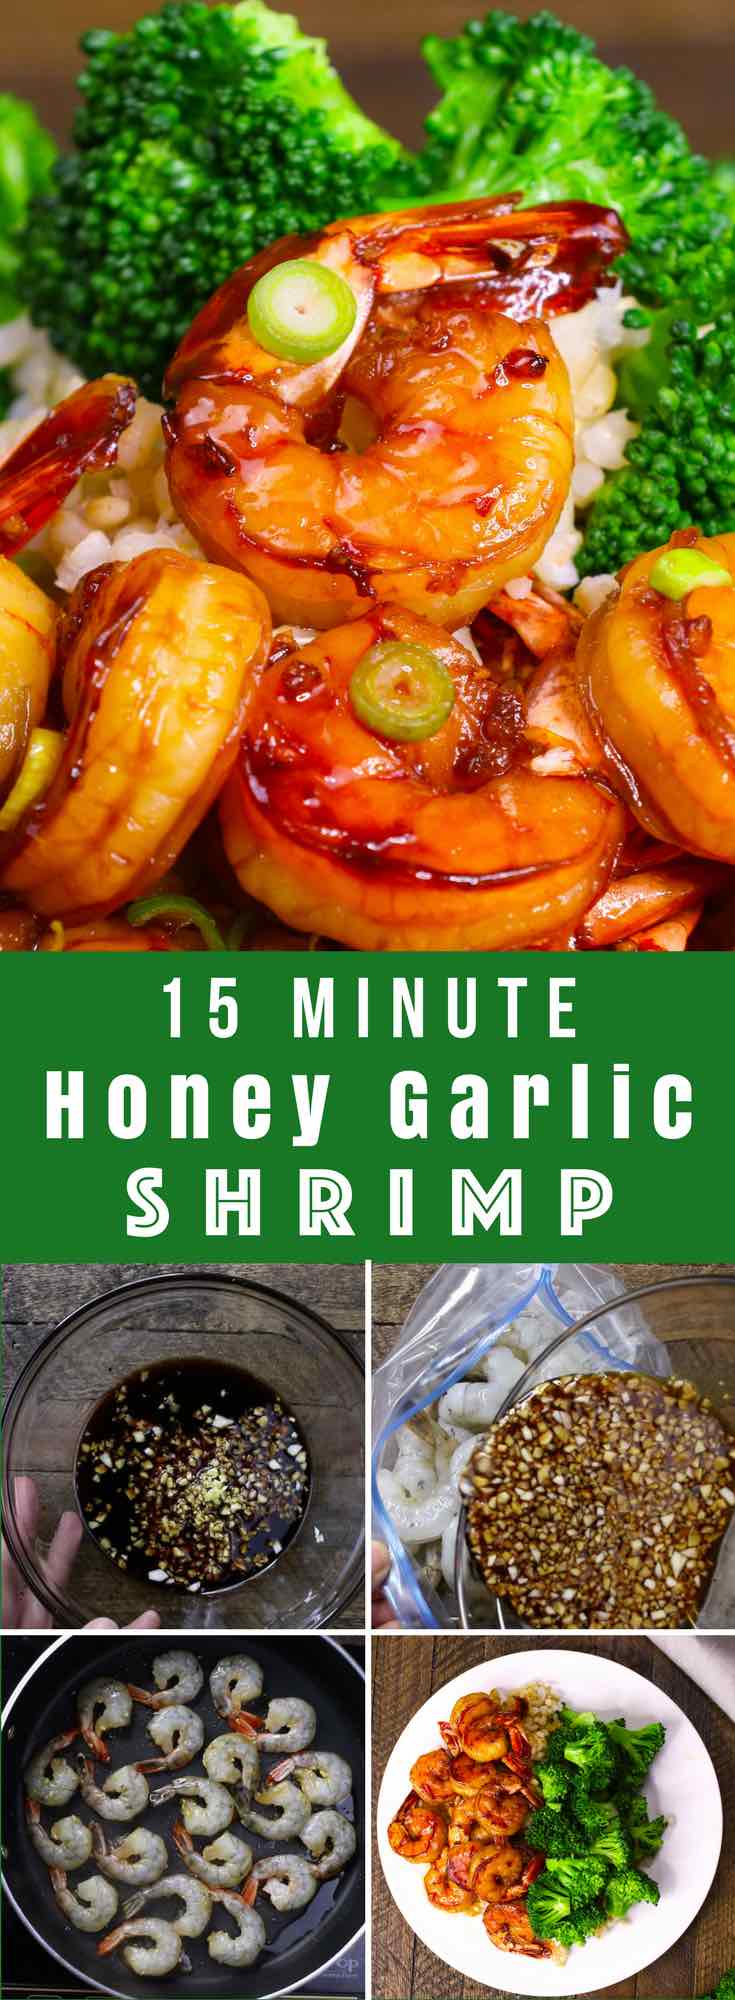 The easiest, most unbelievably delicious Honey Garlic Shrimp. And it’ll be on your dinner table in just 15 minutes. Succulent shrimp marinated in honey, garlic, soy sauce and ginger mix, seared in frying pan. Ready in 15 minutes! Quick and easy dinner recipe. #EasyShrimp #ShrimpRecipe